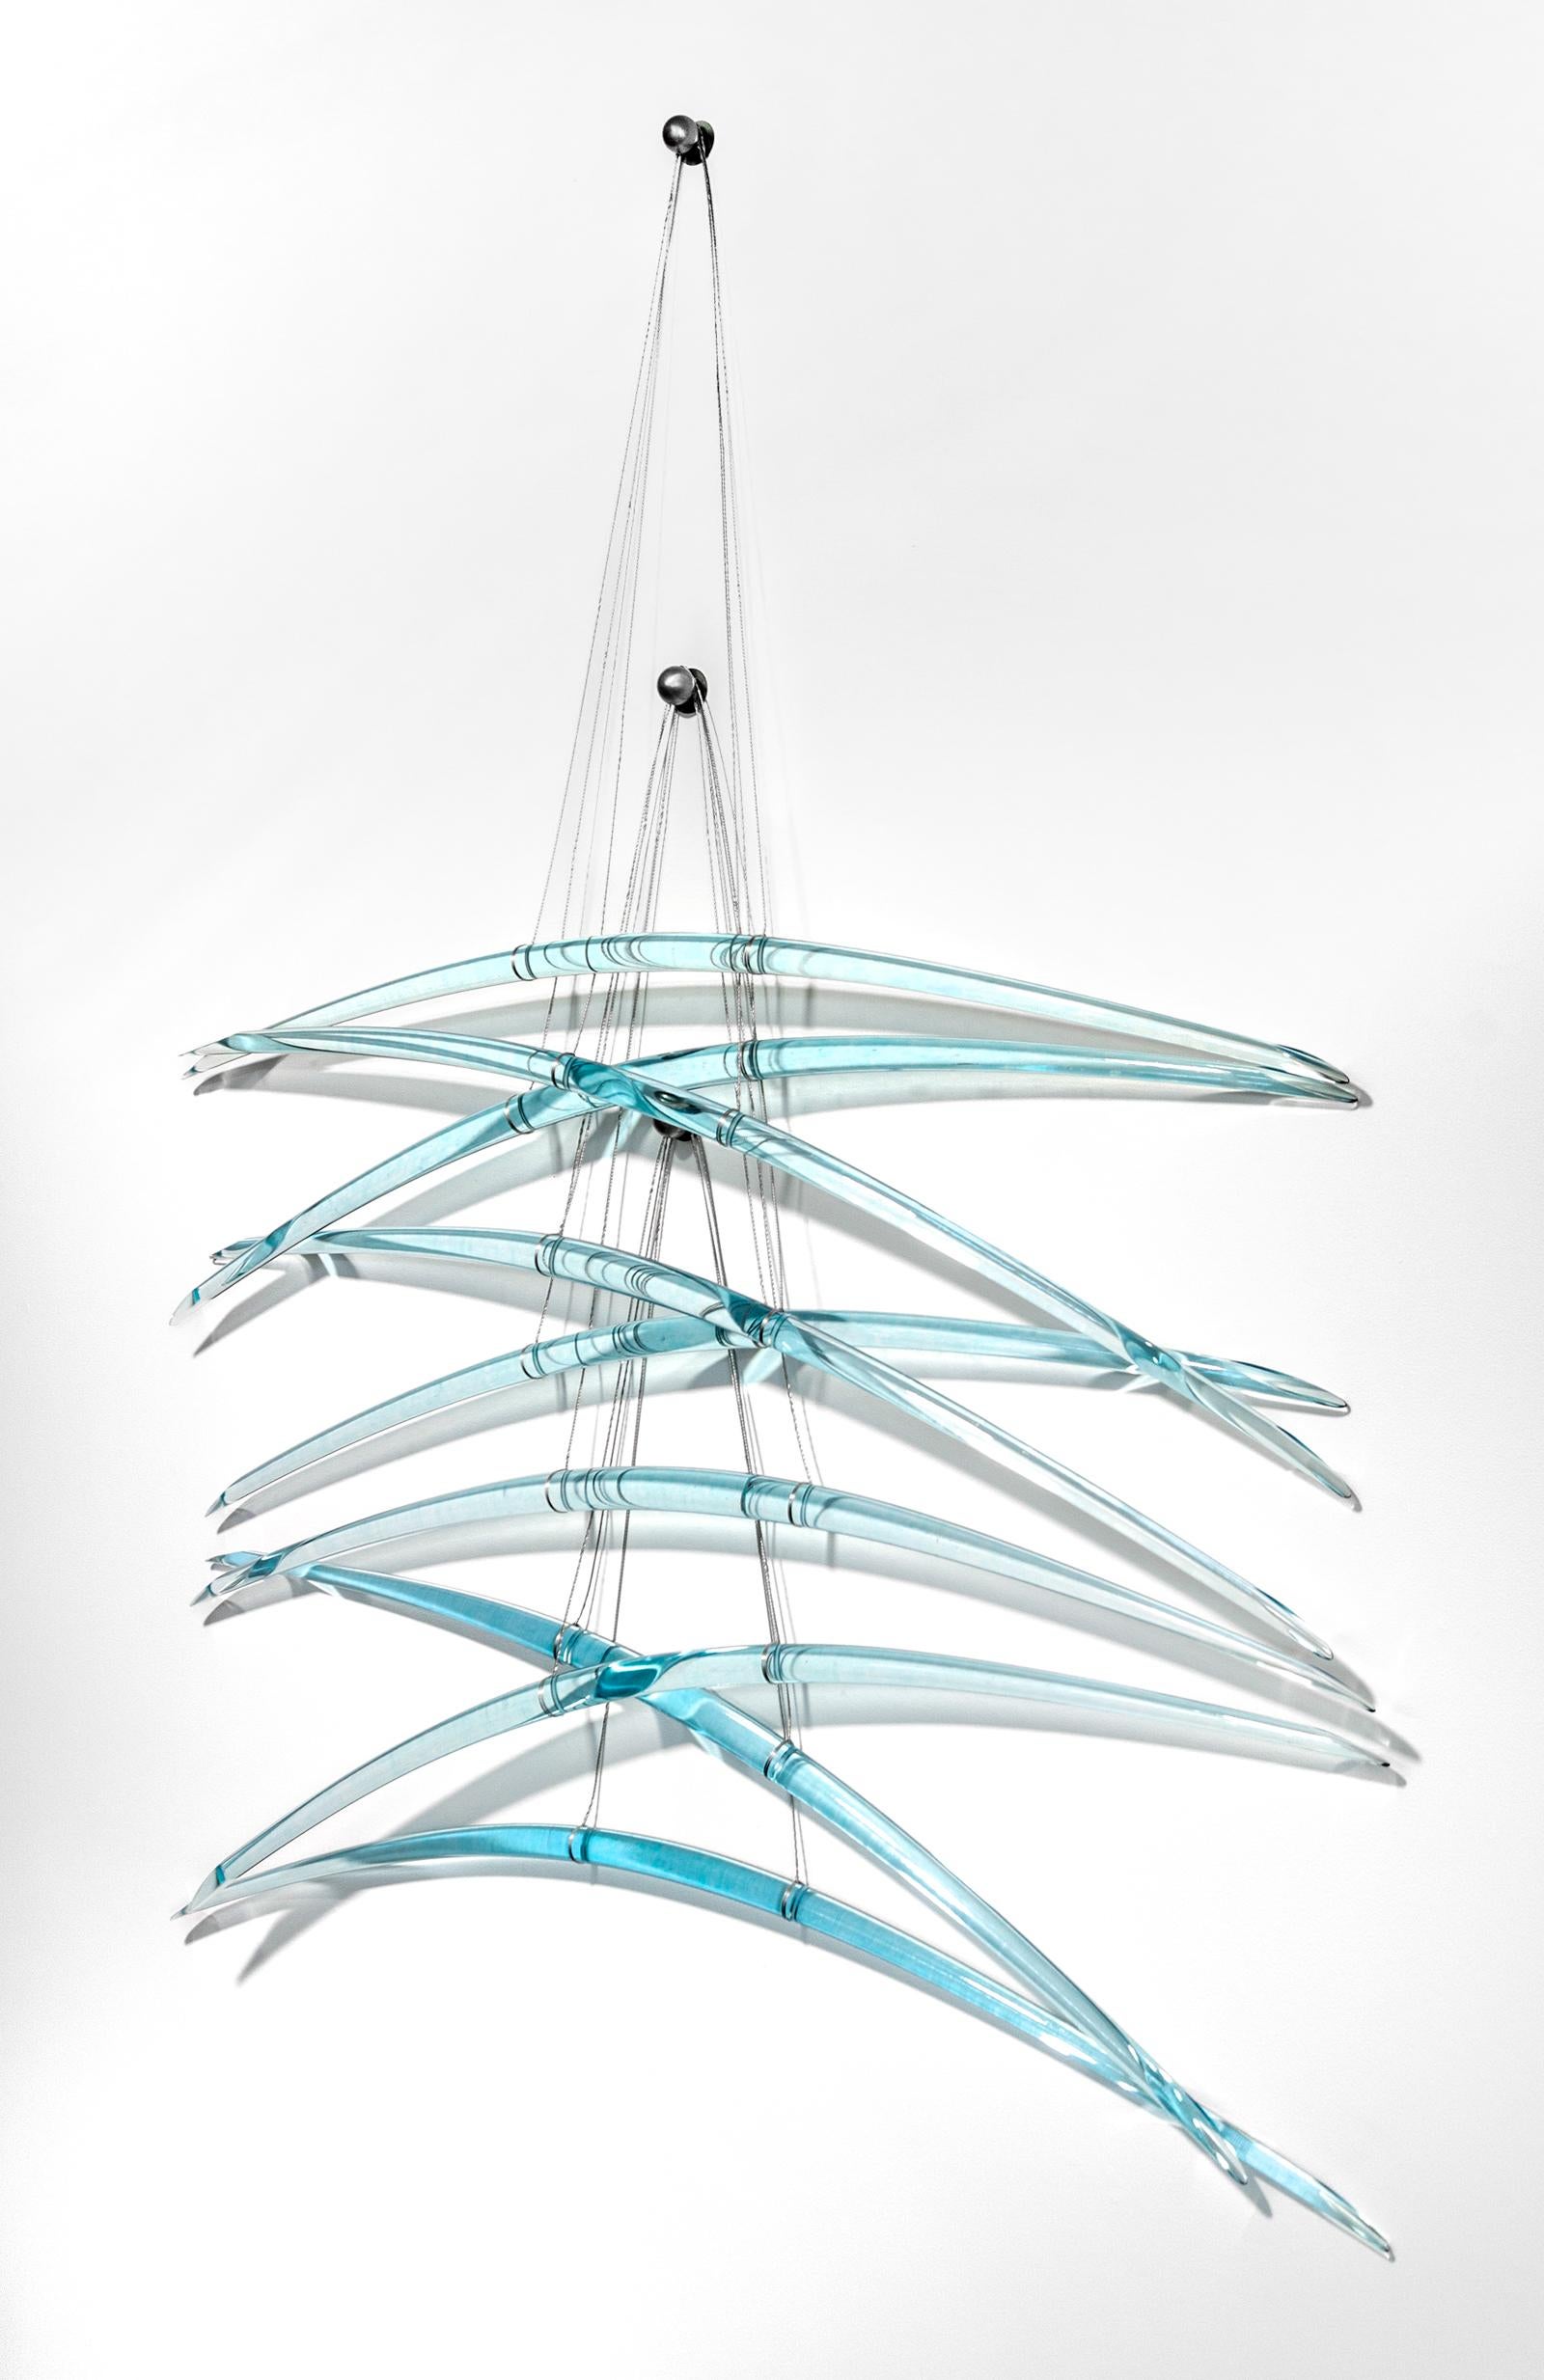 Duality B2 - blue, translucent, abstract, glass, steel, suspended wall sculpture - Contemporary Sculpture by John Paul Robinson